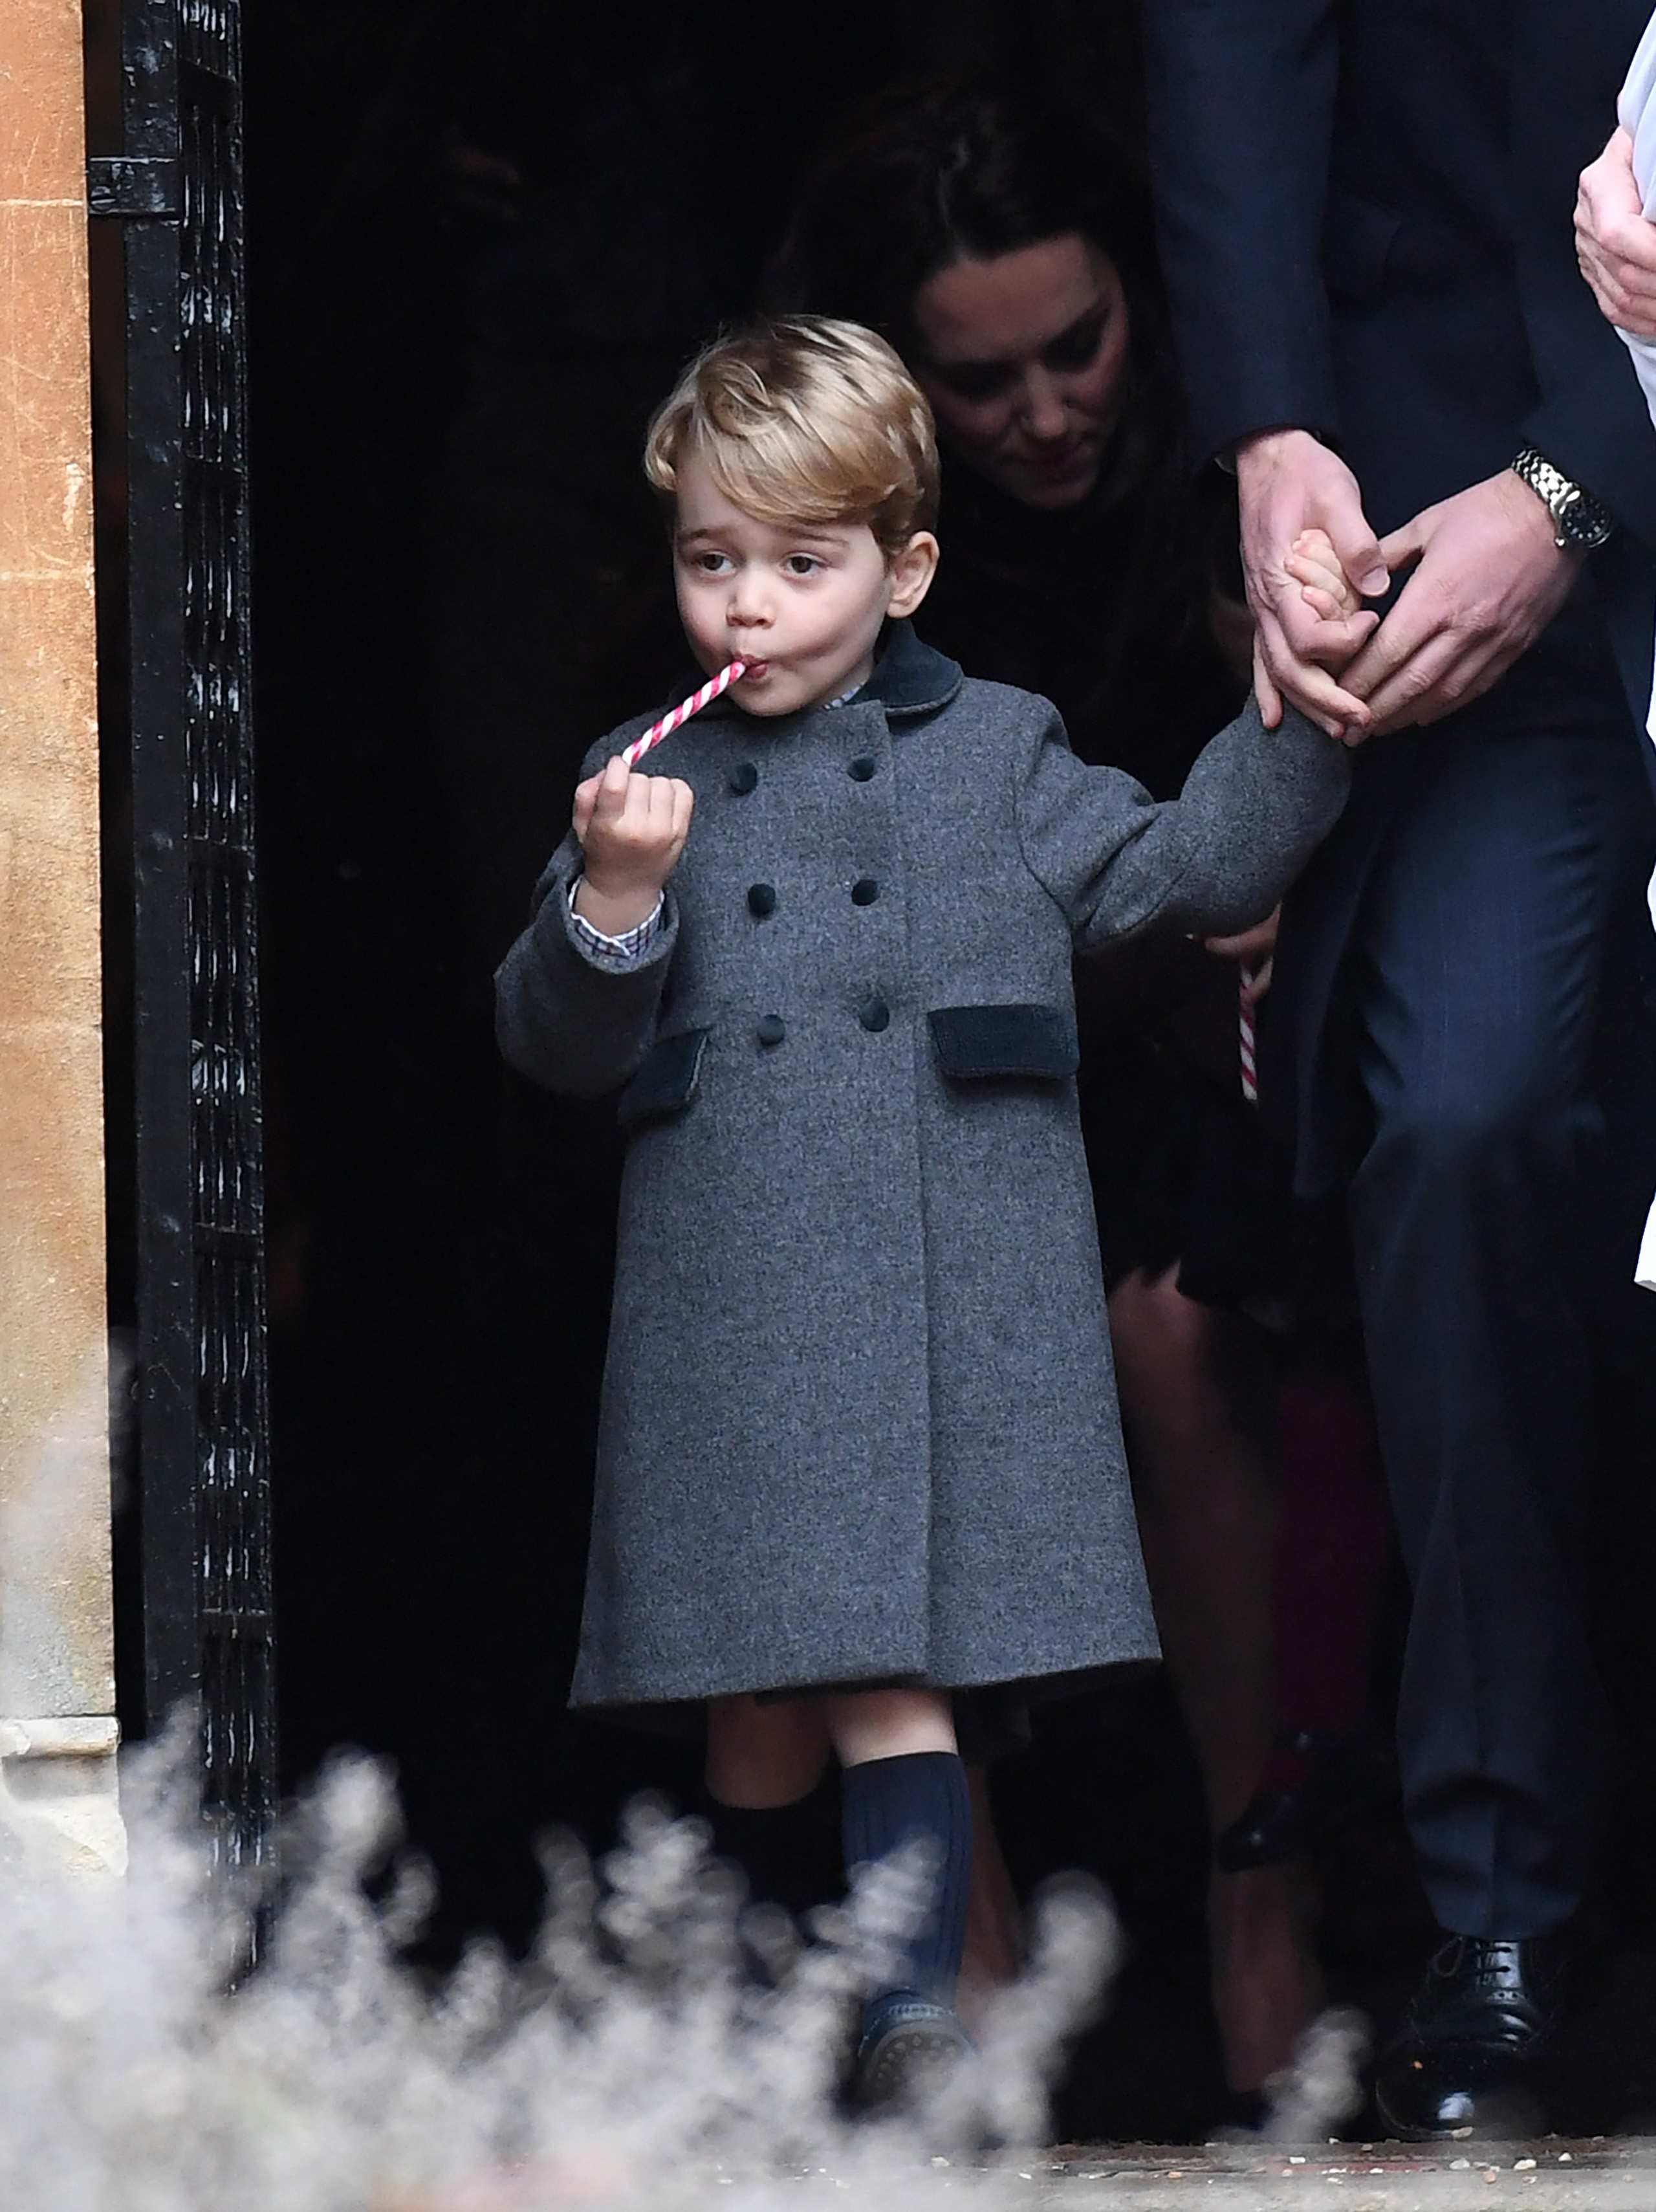 Prince George of Cambridge attends a Christmas Day service at St. Marks Church in Englefield, England, on Dec. 25, 2016. (Anwar Hussein—WireImage/Getty Images)